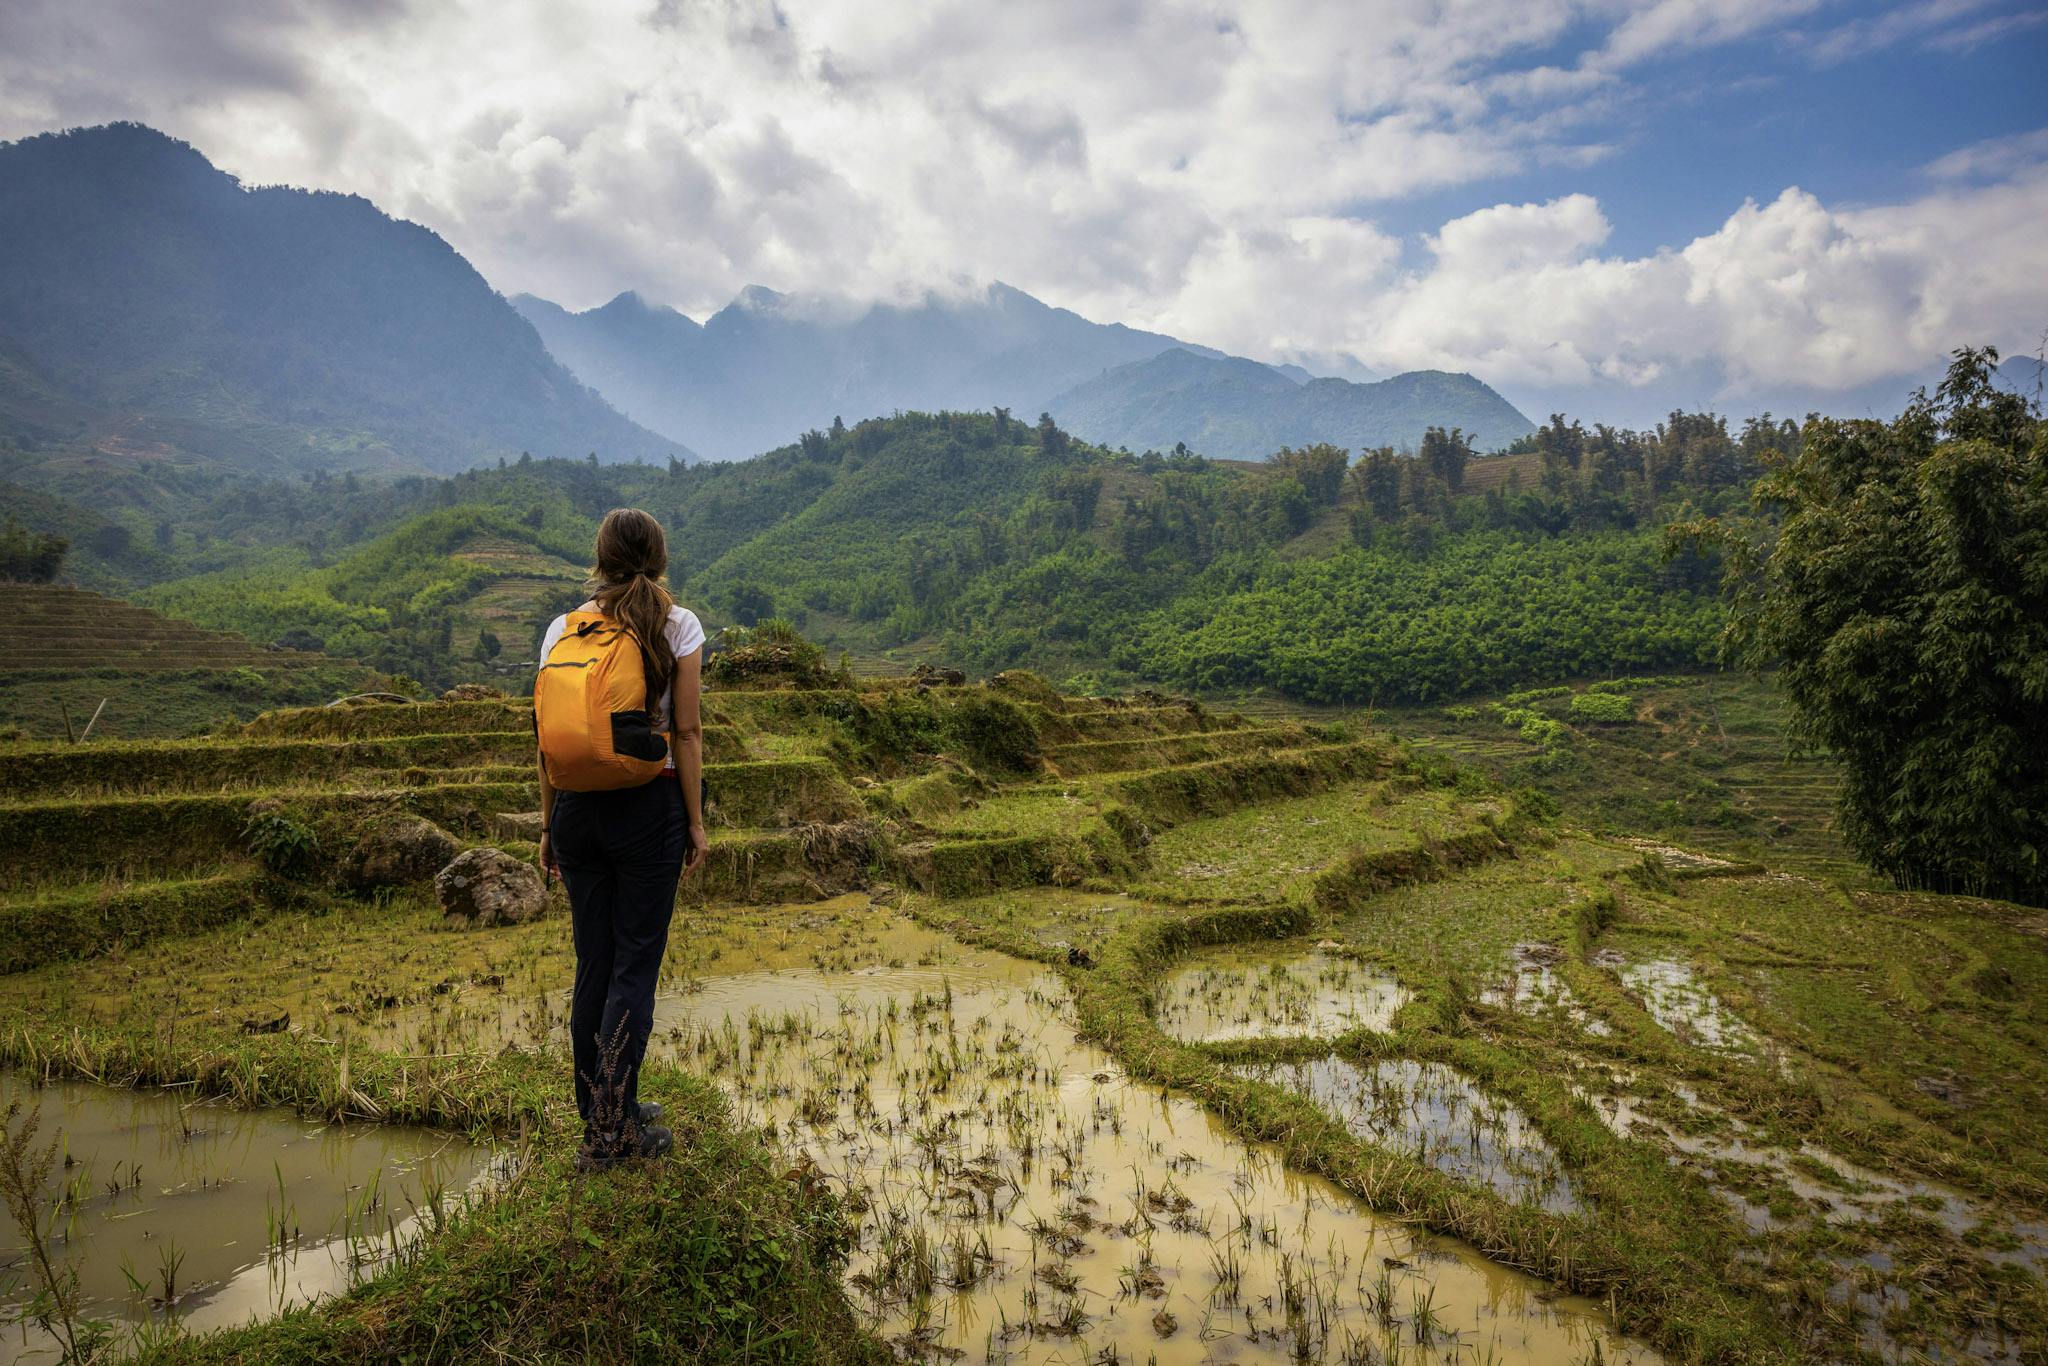 The most popular thing to do is hike rice terraces